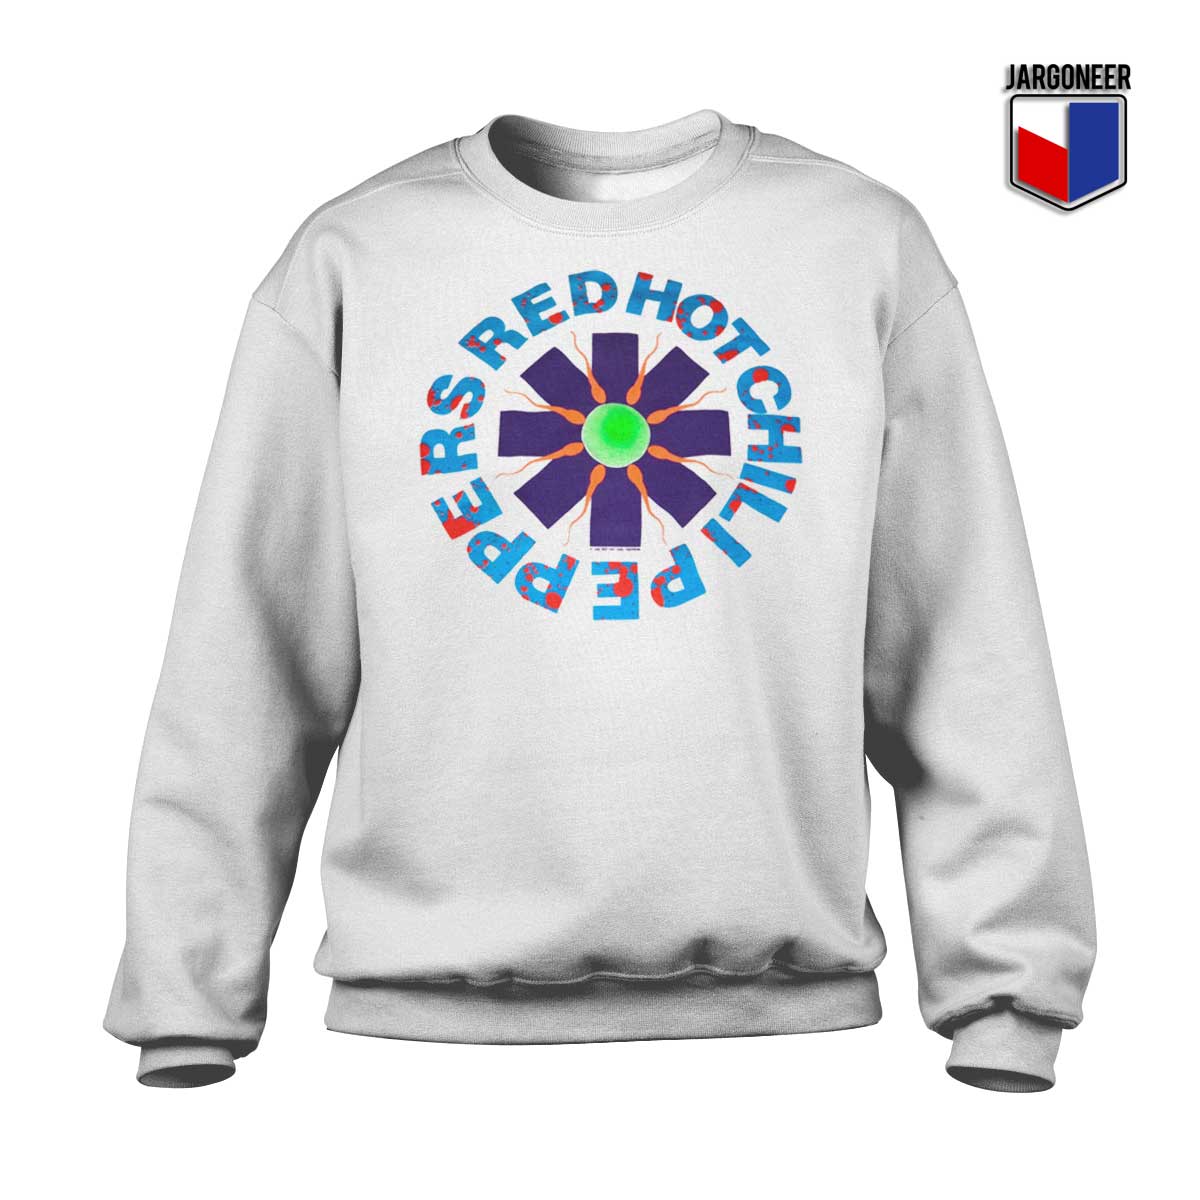 Check Now Red hot Chili Peppers Sweatshirt